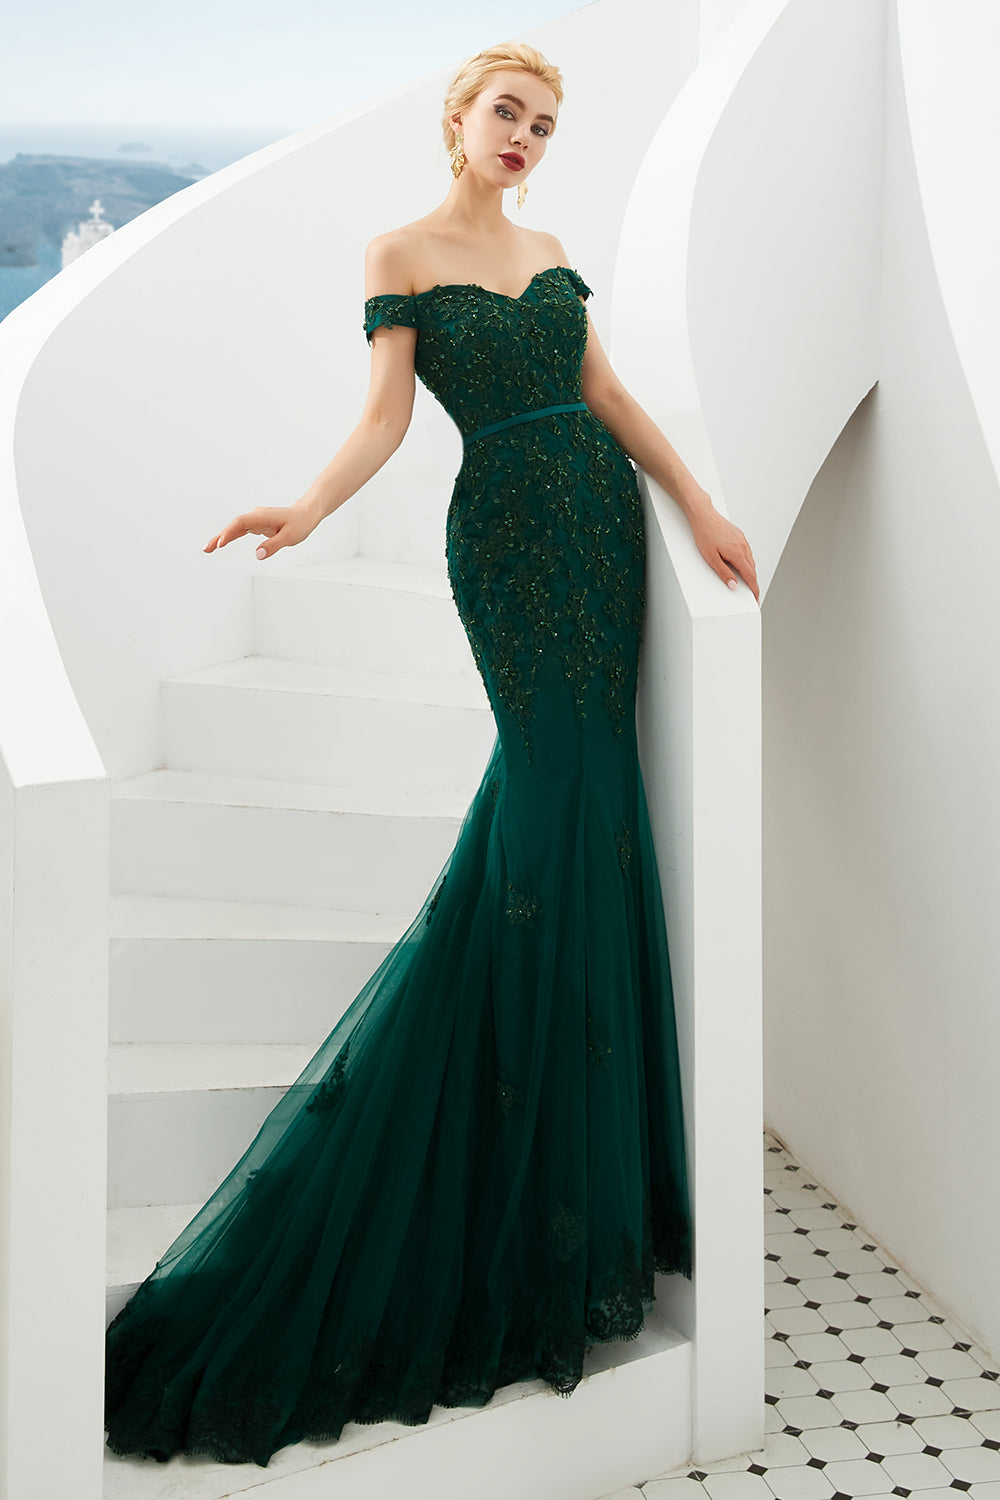 Load image into Gallery viewer, Elegant Long Mermaid Off-the-shoulder Tulle Lace Prom Dress-BIZTUNNEL
